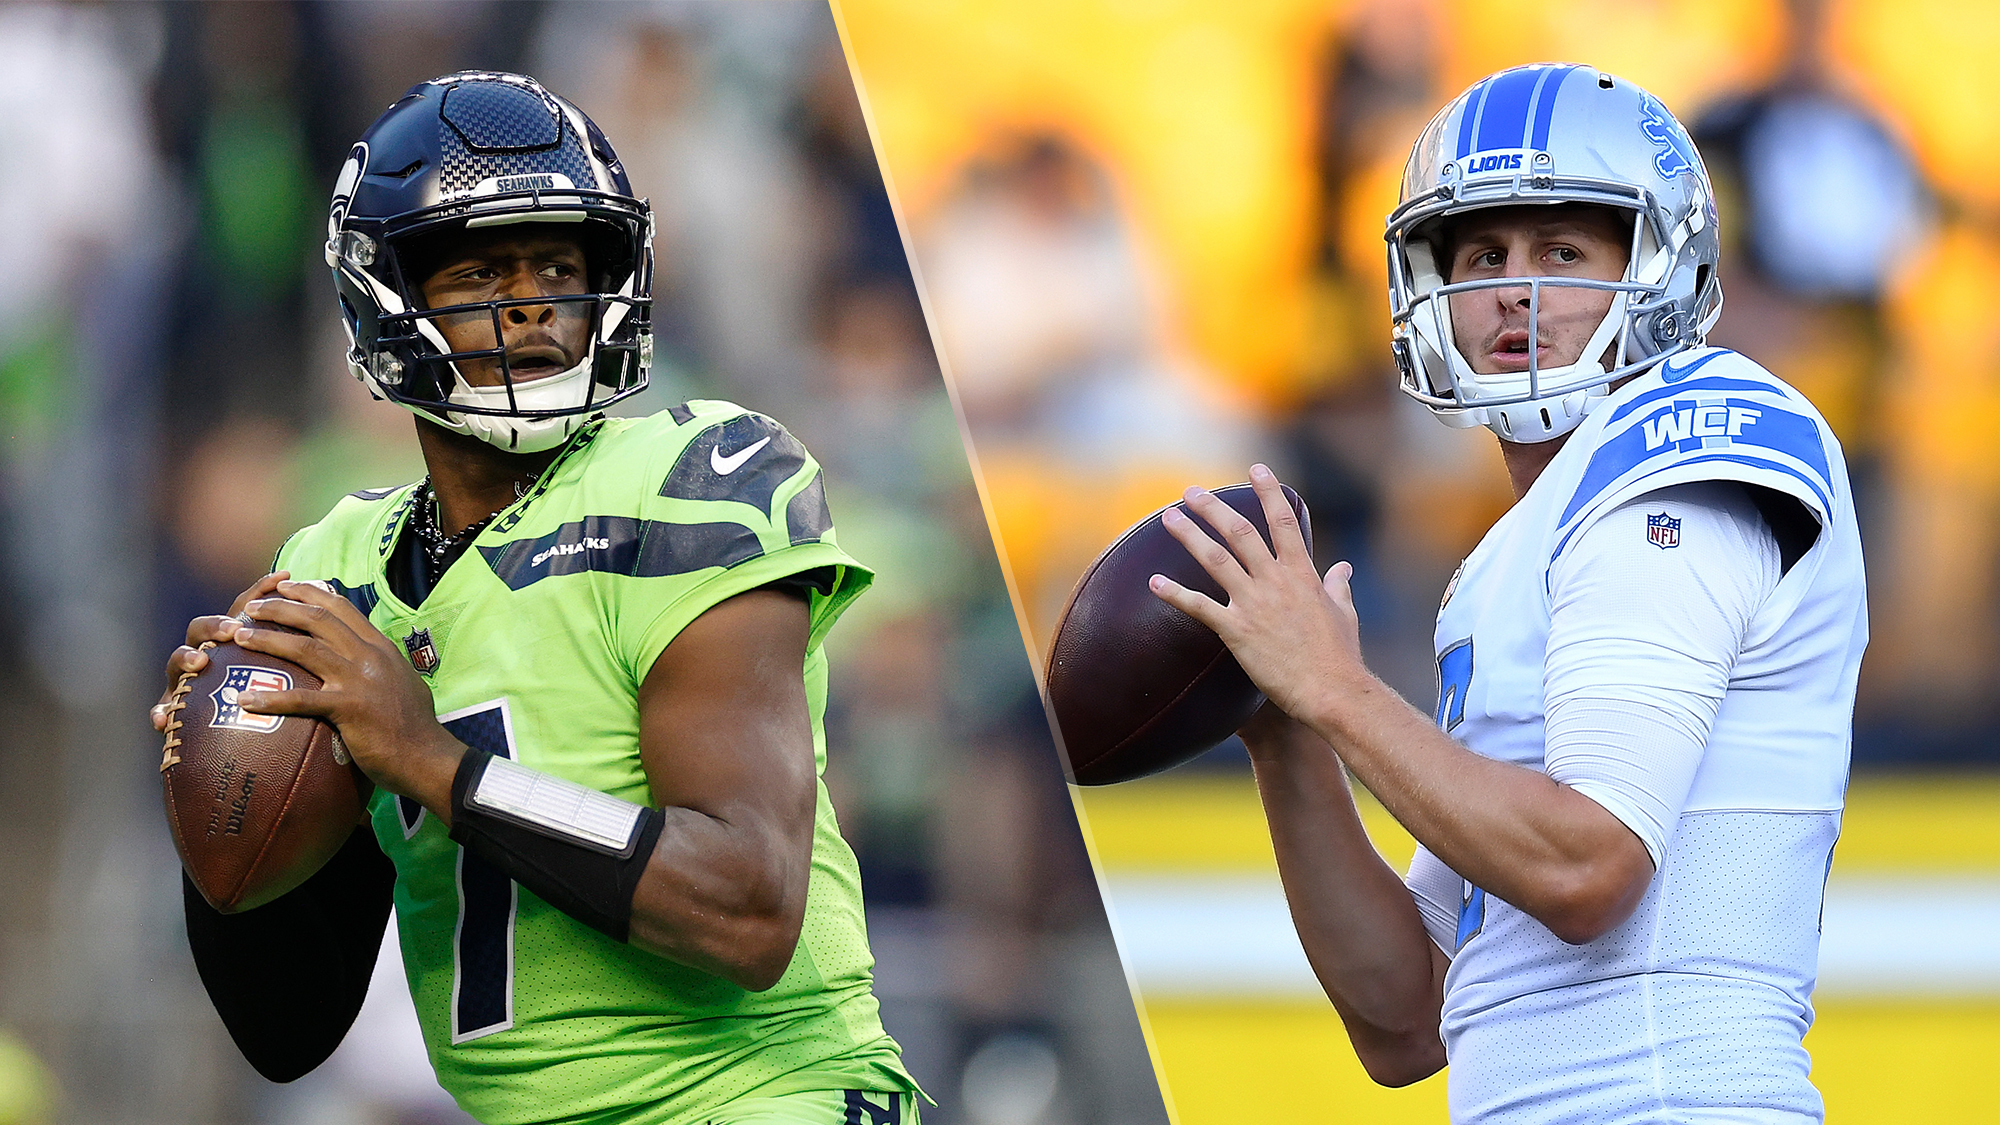 Seahawks vs Lions live stream: How to watch NFL week 2 online